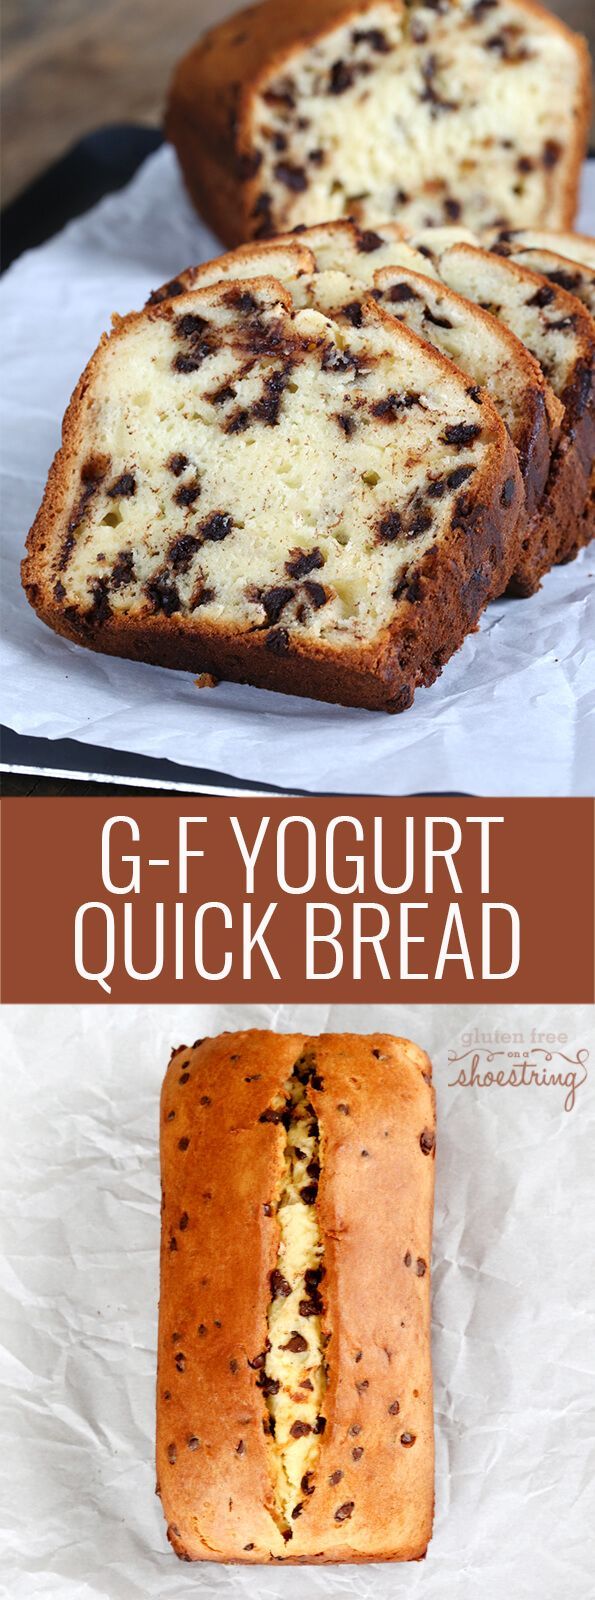 This tested recipe for gluten free quick bread is made with yogurt and chocolate chips. Super simple recip